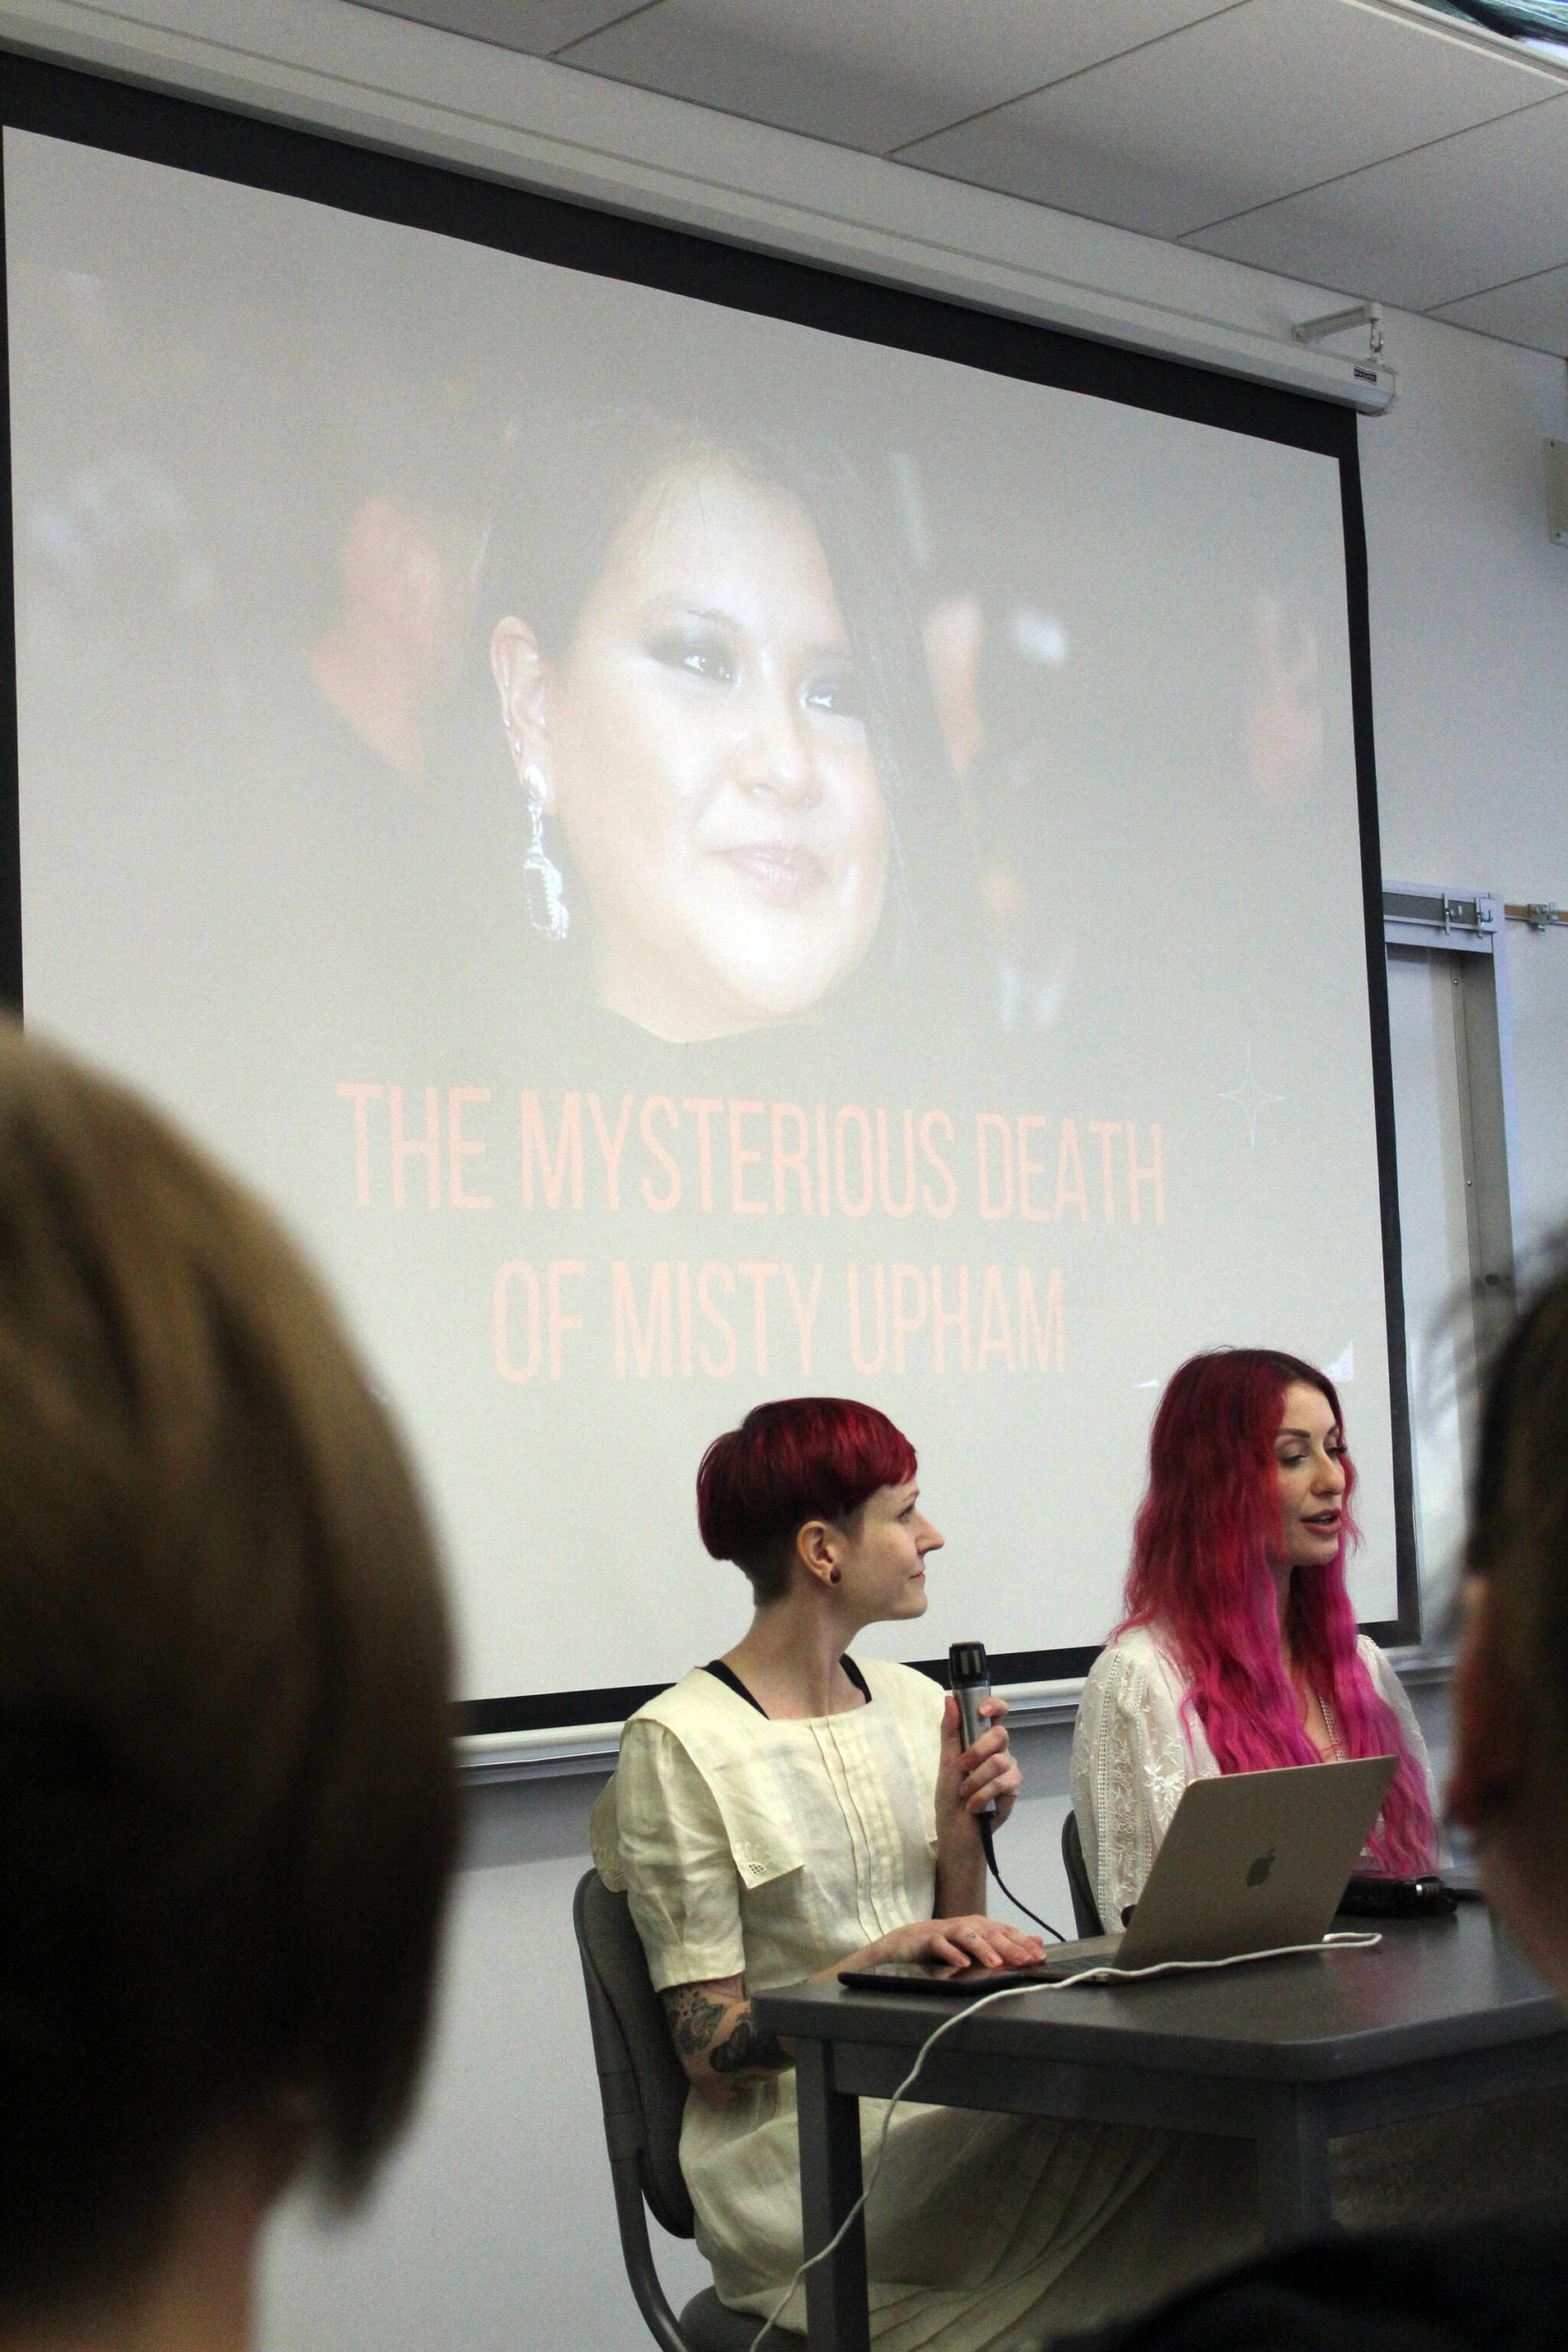 The Murder Murder News podcast, hosted by Angelina (left) and Aurora, recorded a live episode about the mysterious death of Misty Upham, an indigenous actor who died in Auburn, Washington, in 2014. Photo by Bailey Jo Josie/Sound Publishing.